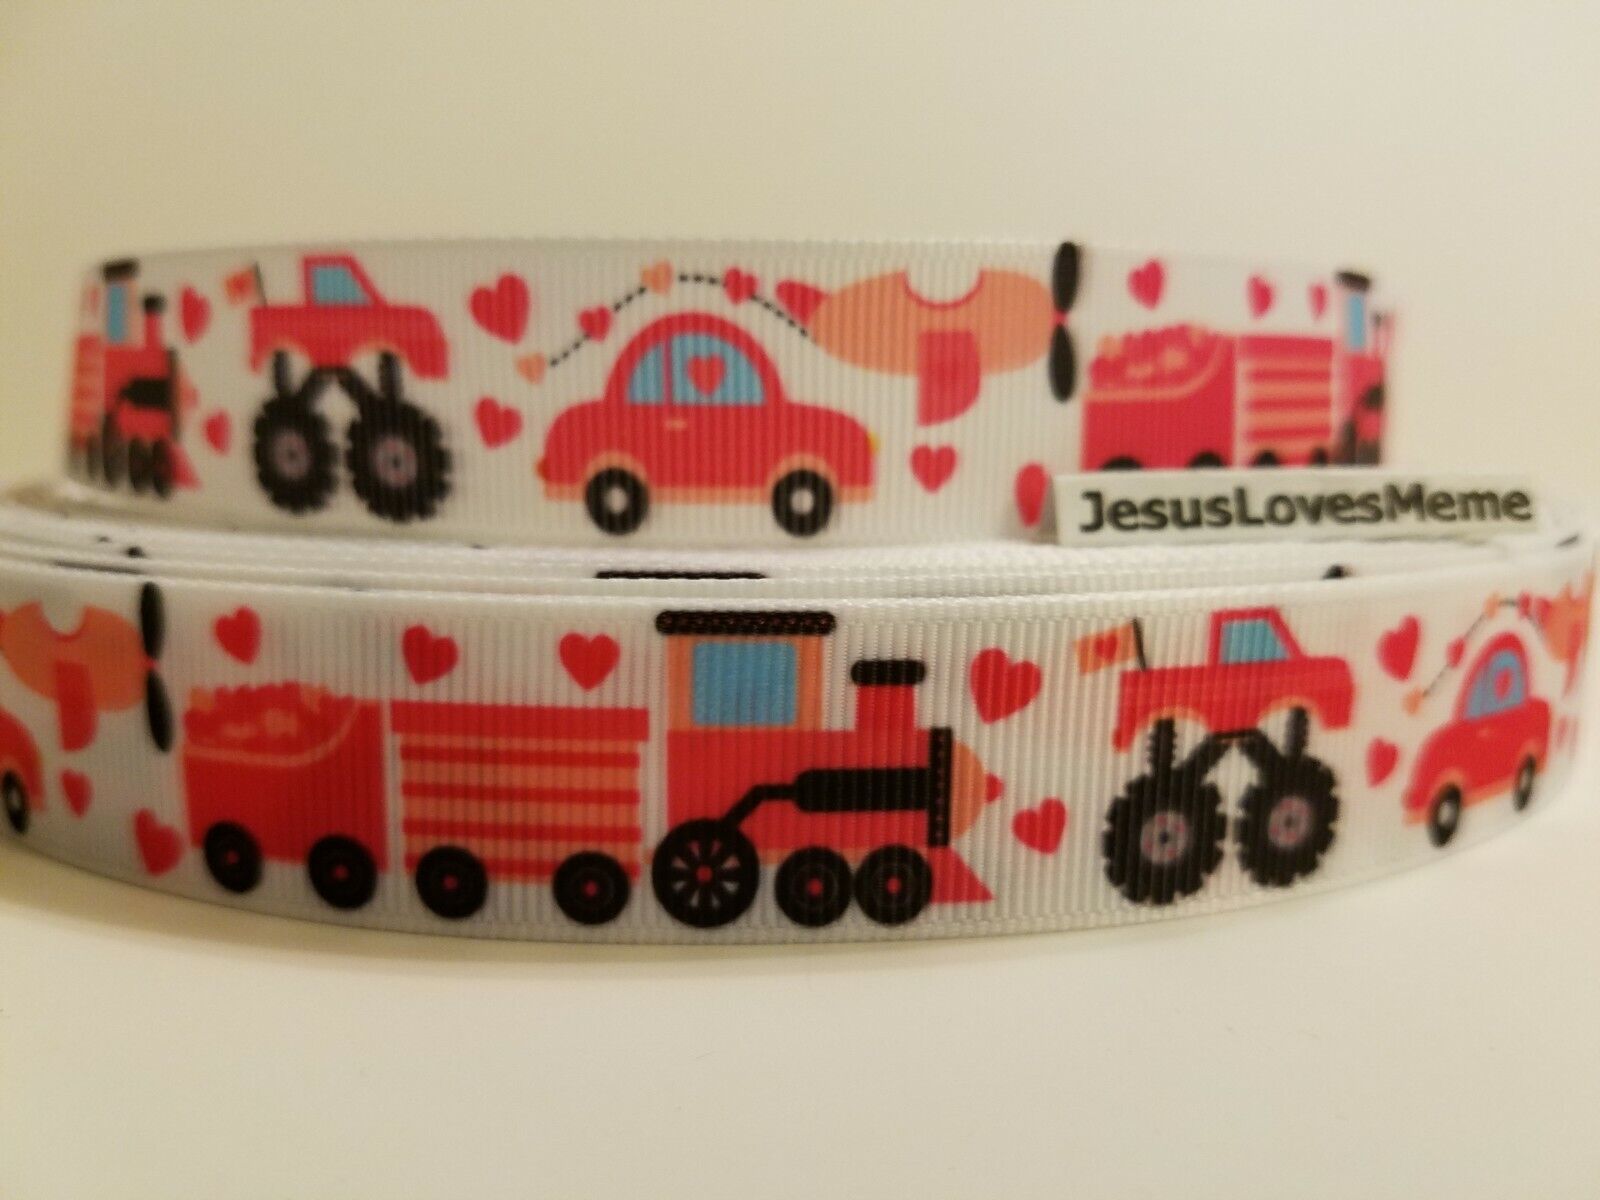 CLEARANCE Grosgrain Ribbon - 3 Yards $1.47 Monster Trucks Trains Cars 7/8" Wide Unbranded Does Not Apply